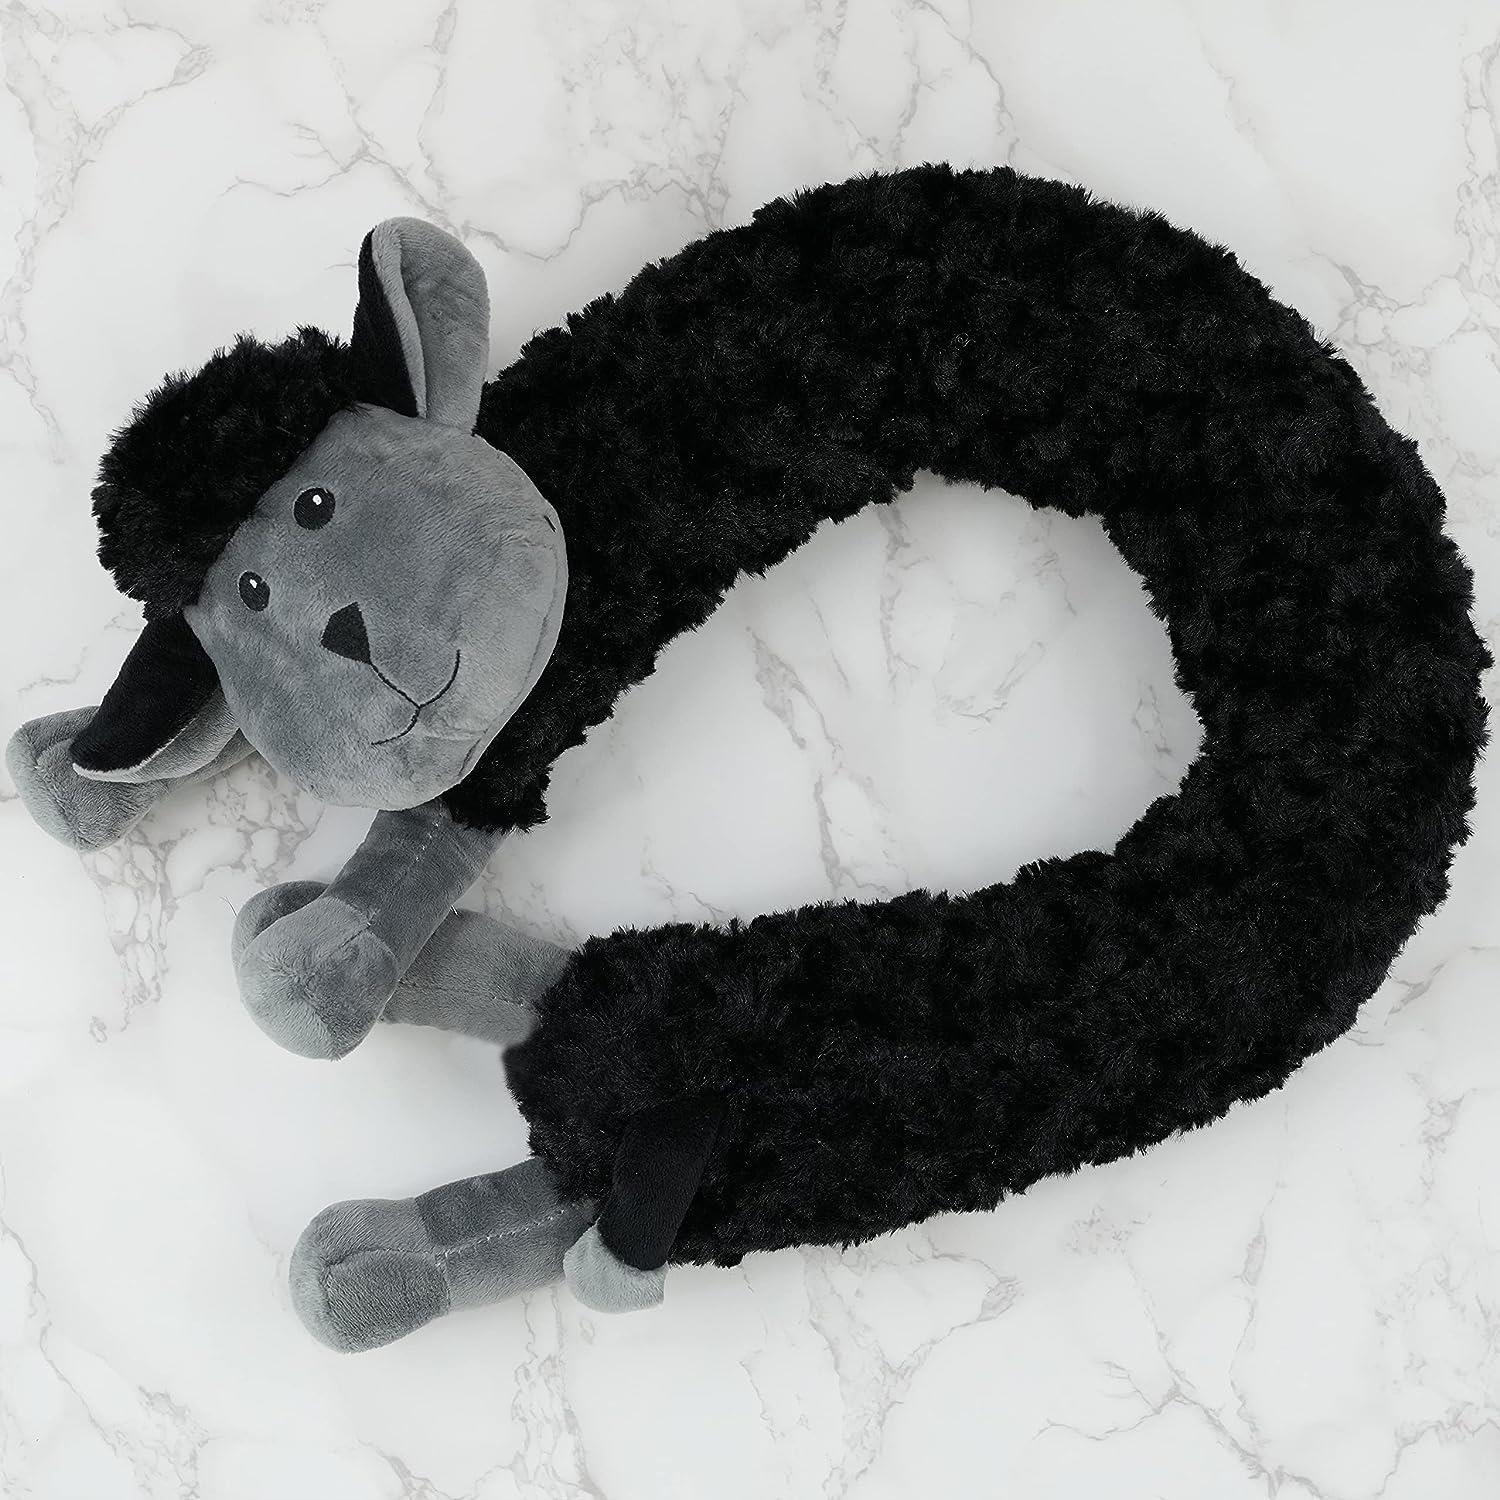 Novelty Black Sheep Excluder by The Magic Toy Shop - UKBuyZone